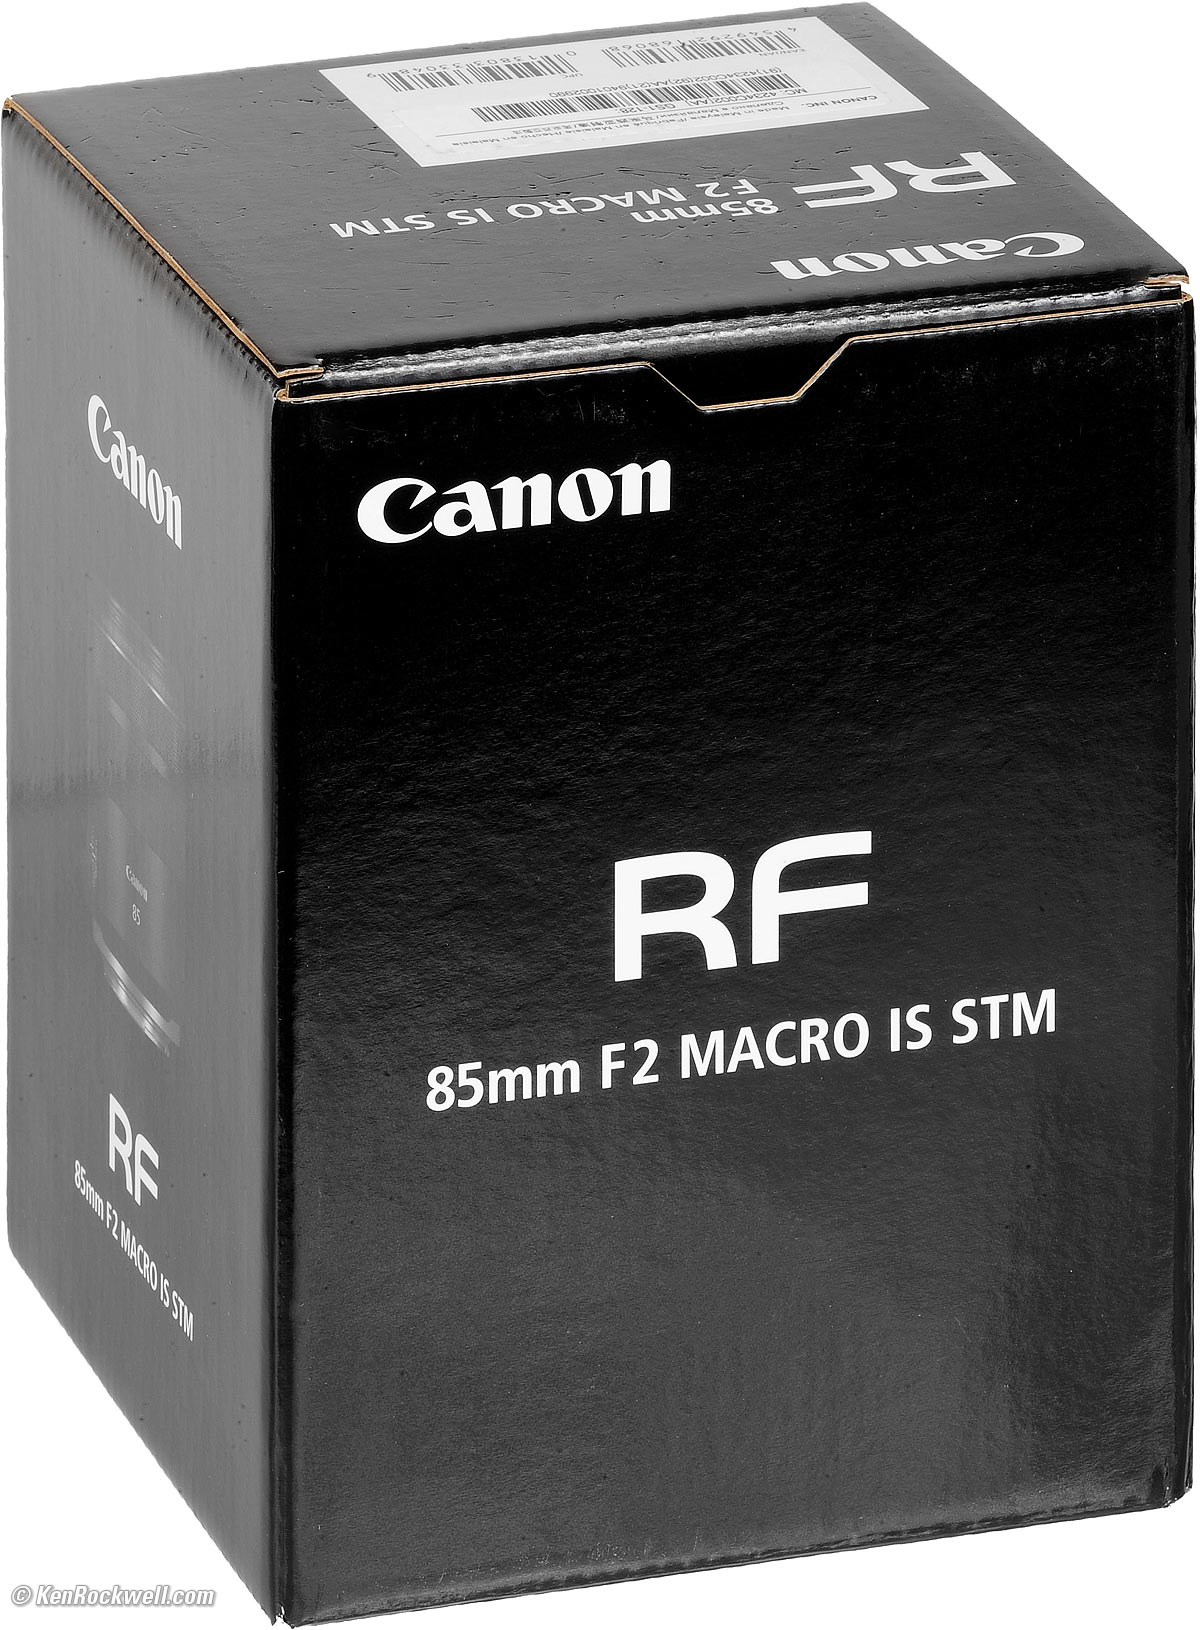 Canon RF 85mm f/2 Macro Review